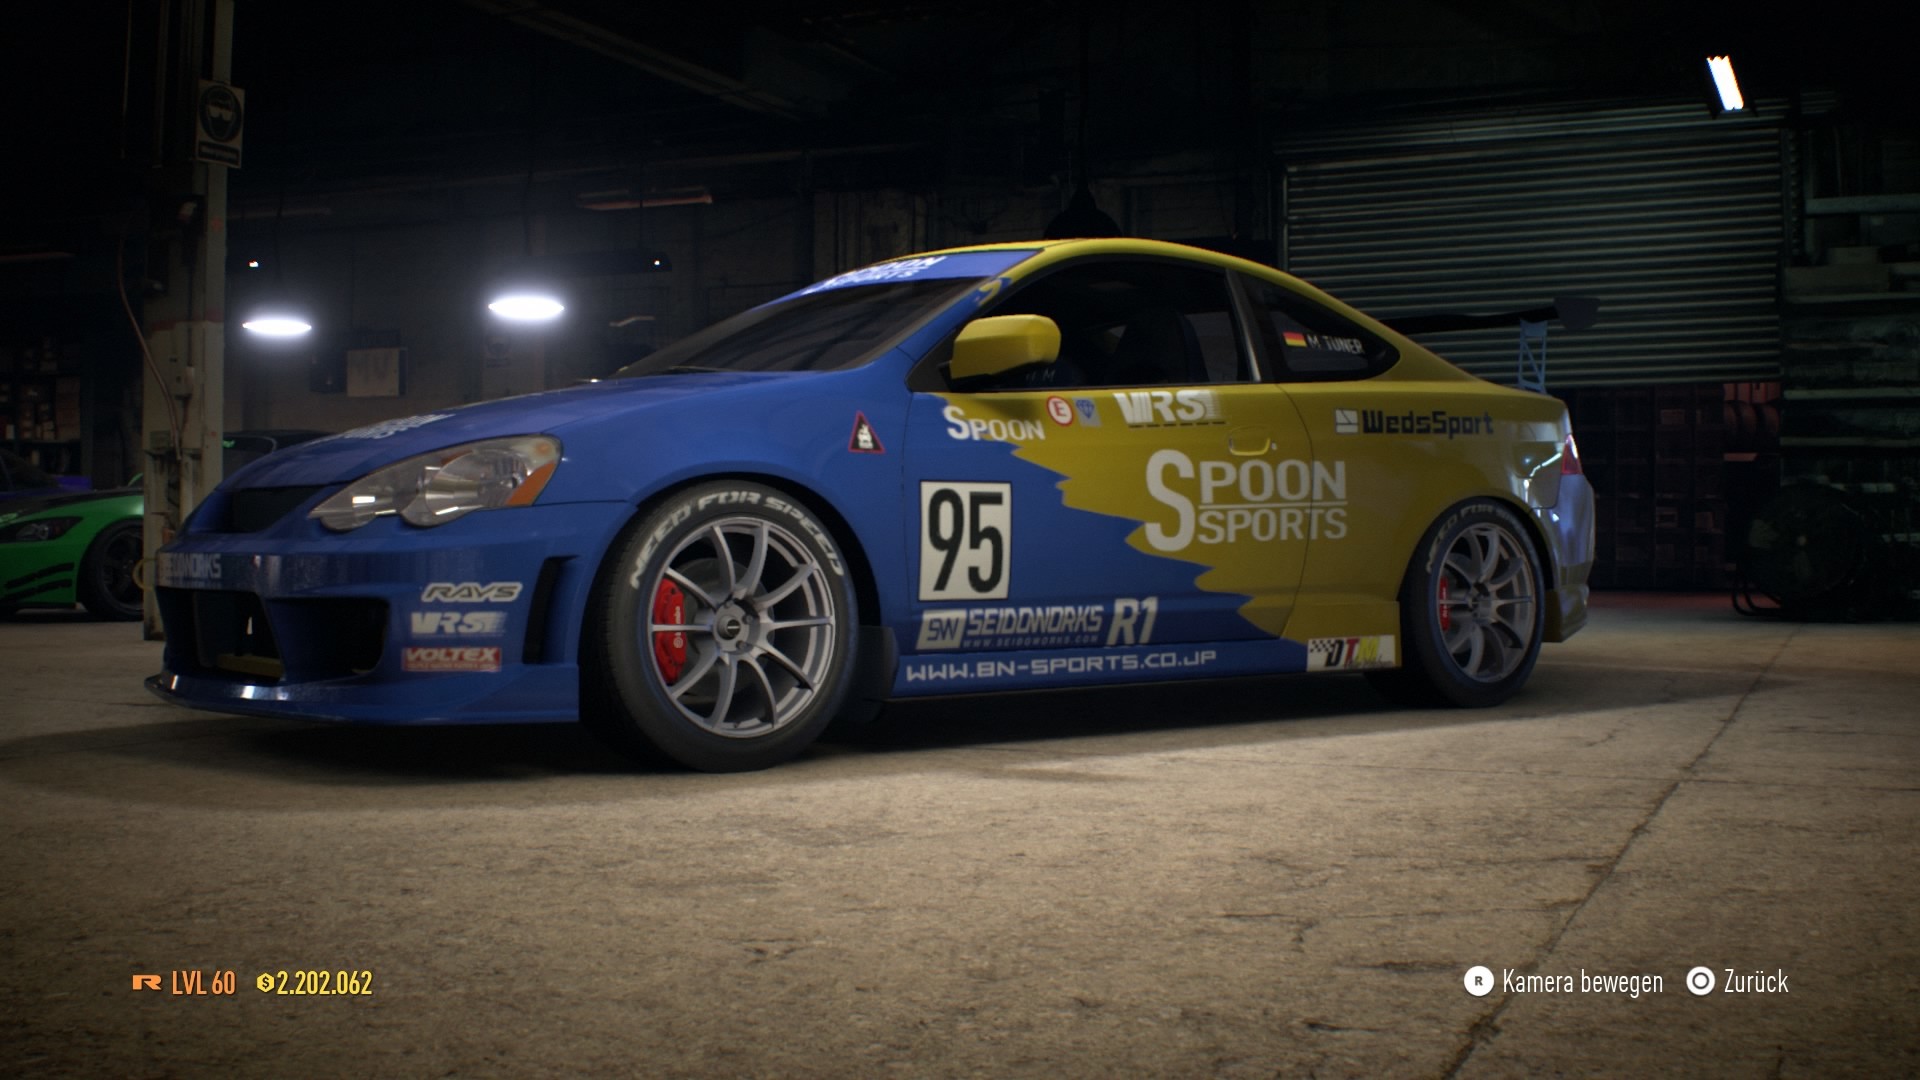 1920x1080 ... Need for Speed - Acura RSX Spoon Sports TouringCar by MangaTuner2009